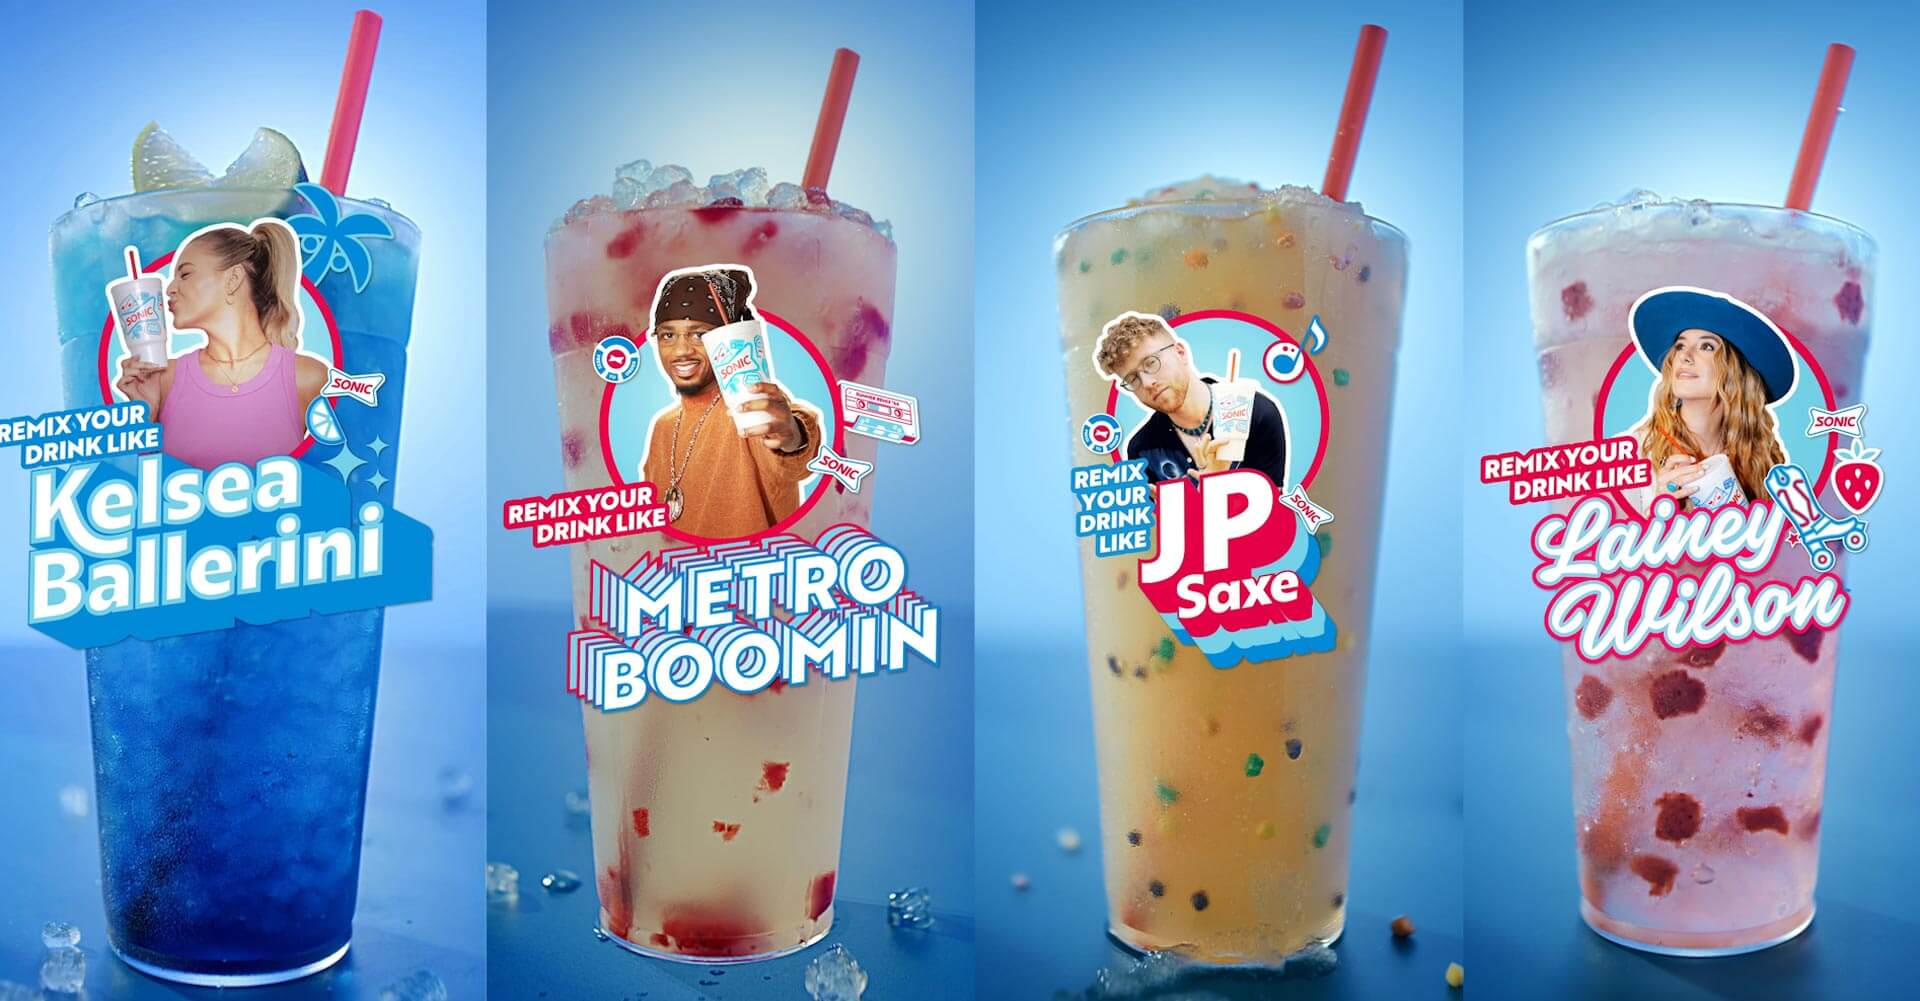 4 different personalized celebrity drinks with their names and photo emblazoned across each one – Kelsea Ballerini, Metro Boomin, JP Saxe and Lainey Wilson.